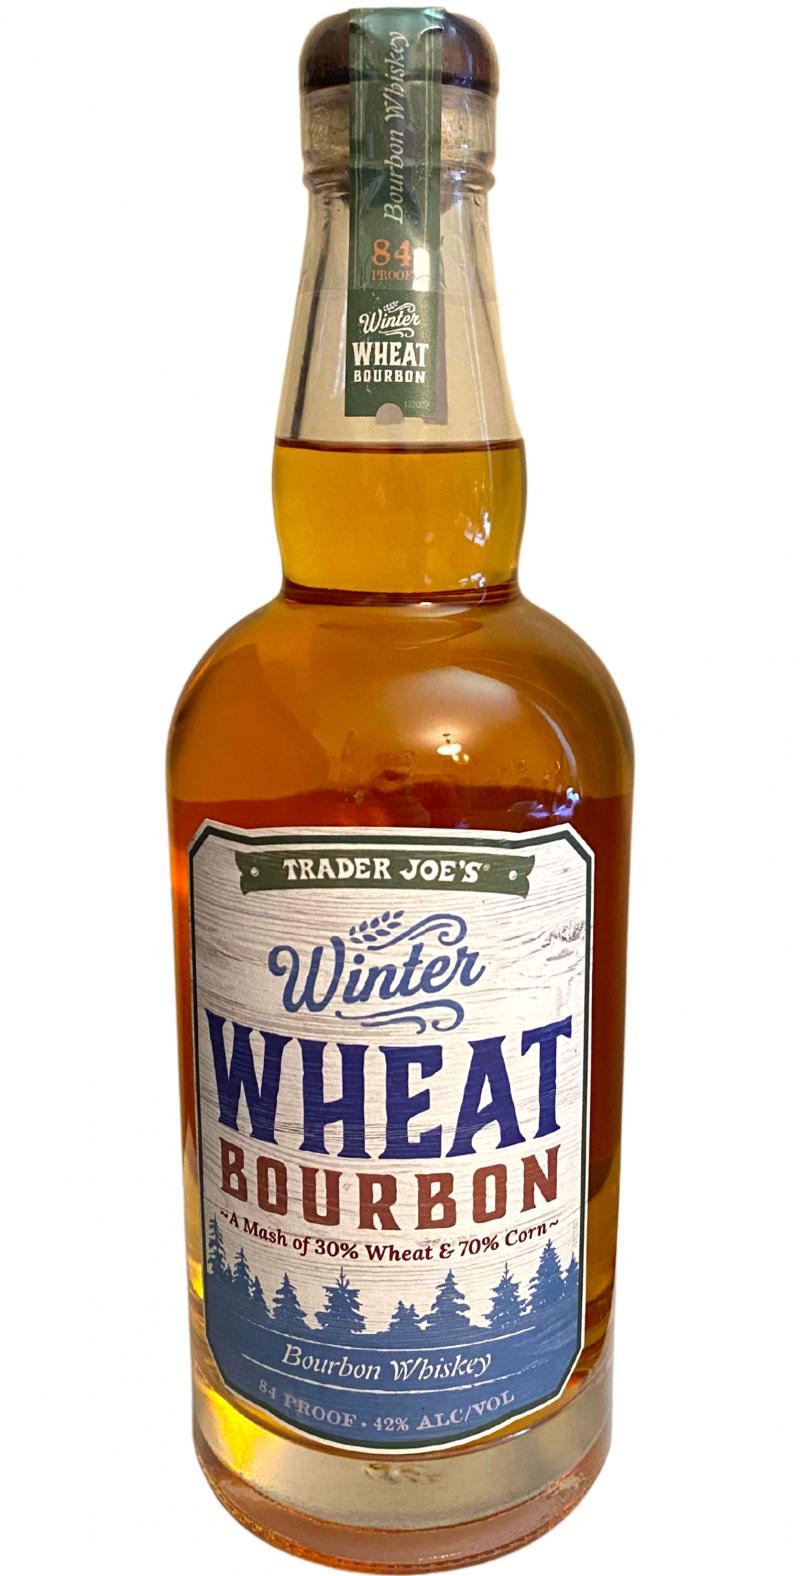 Trader Joe's Whiskybase Ratings and reviews for whisky